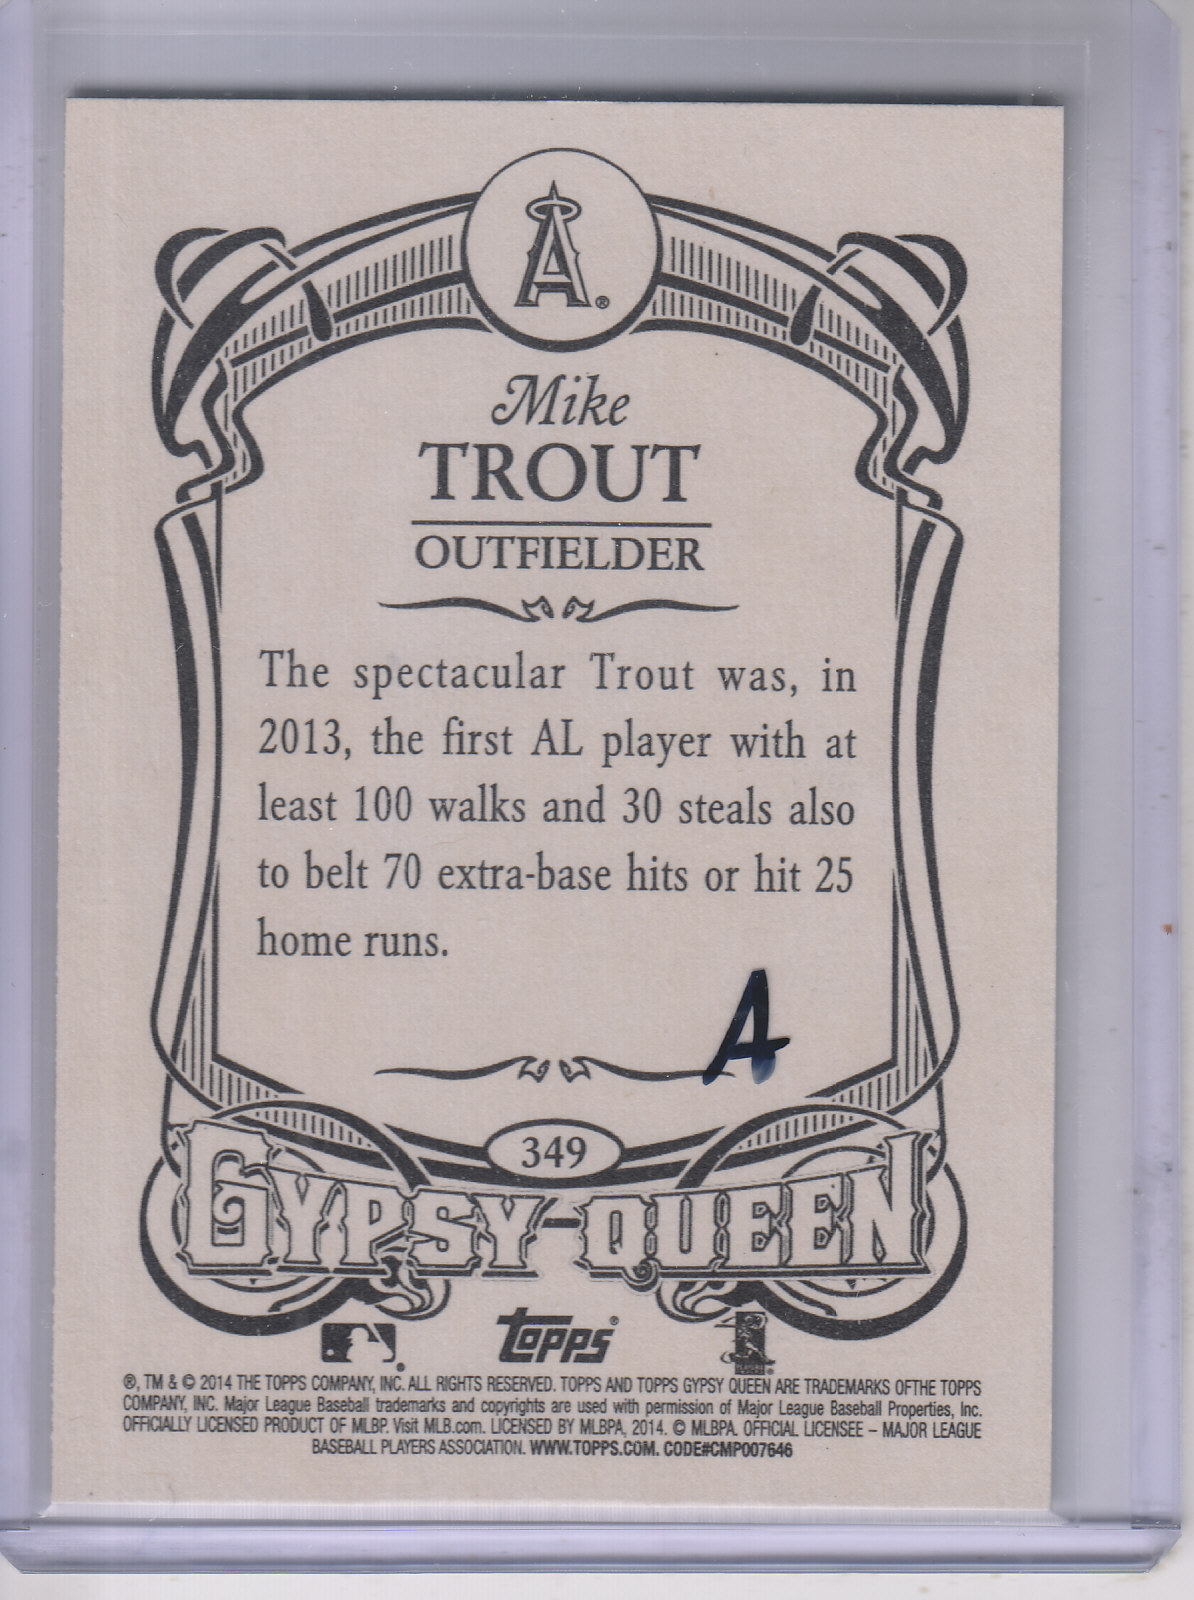 2014 Topps Gypsy Queen #349A Mike Trout SP back image